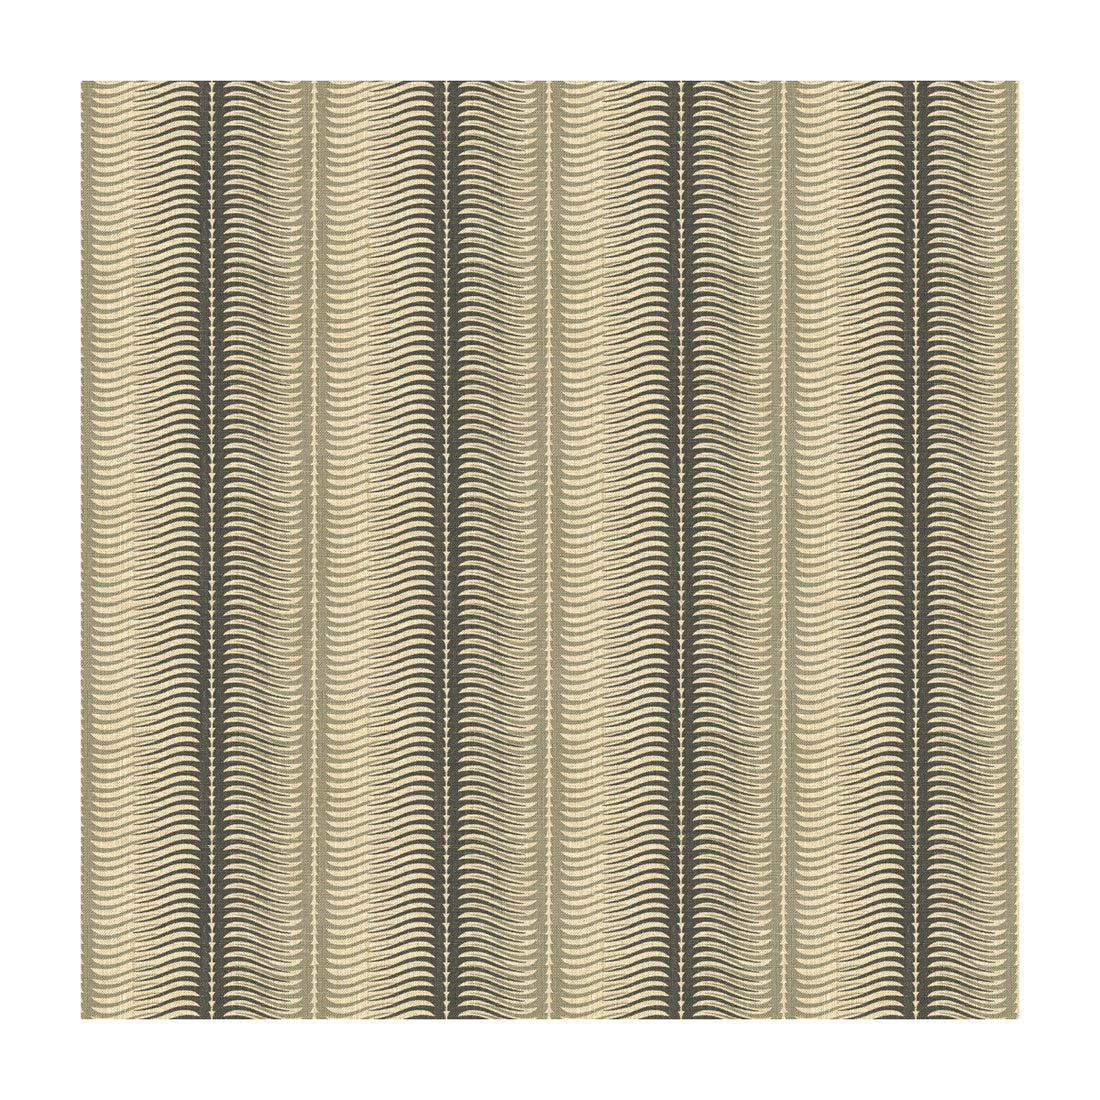 Stripes fabric in metal color - pattern GWF-3509.11.0 - by Lee Jofa Modern in the Allegra Hicks Garden collection